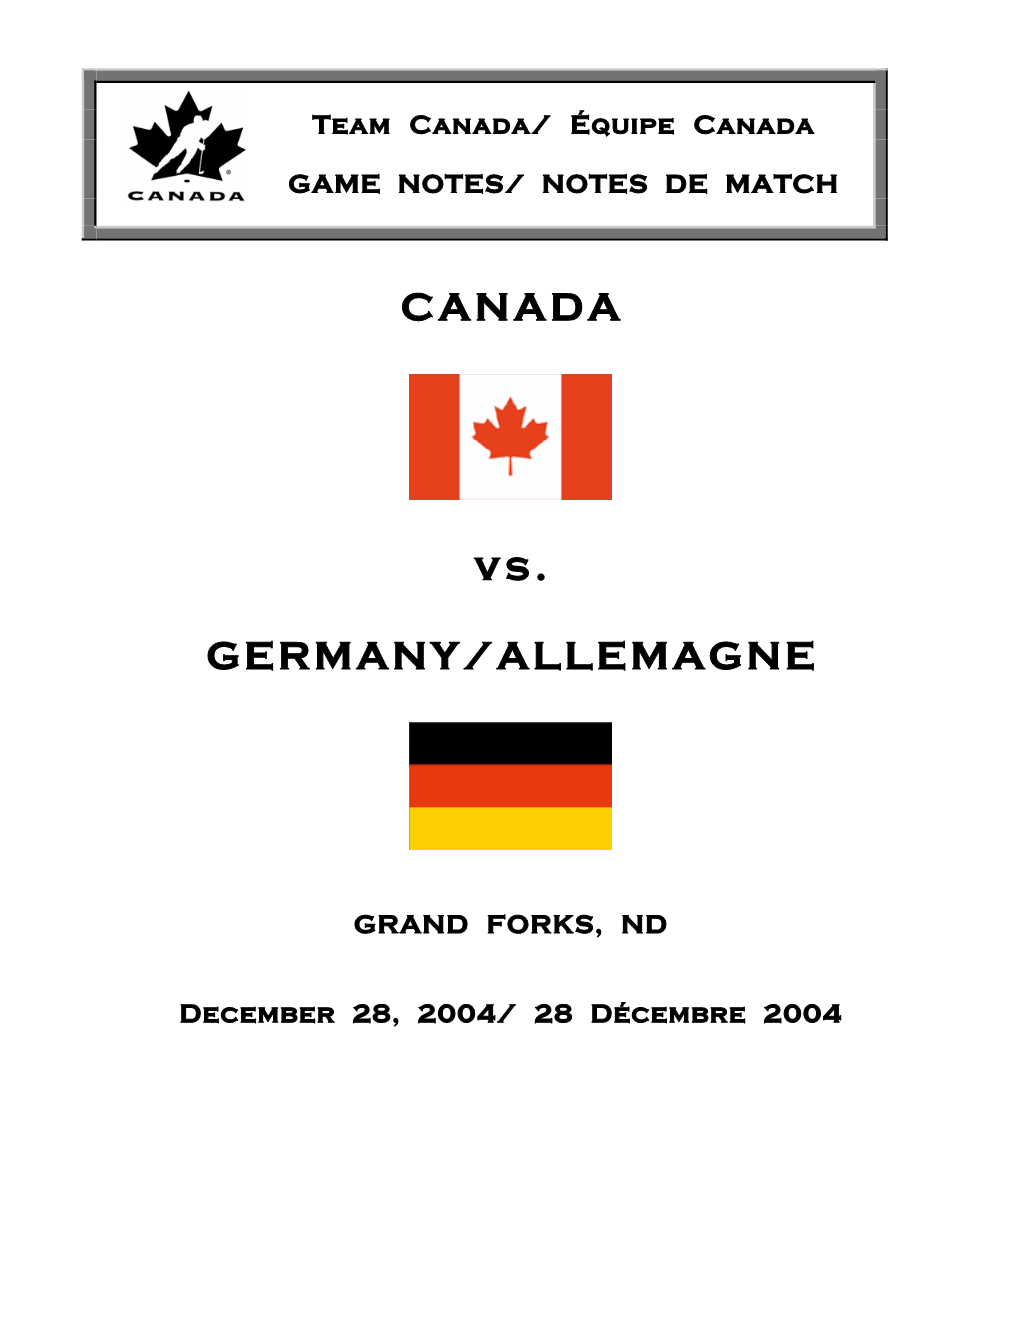 CANADA Vs. GERMANY/ALLEMAGNE